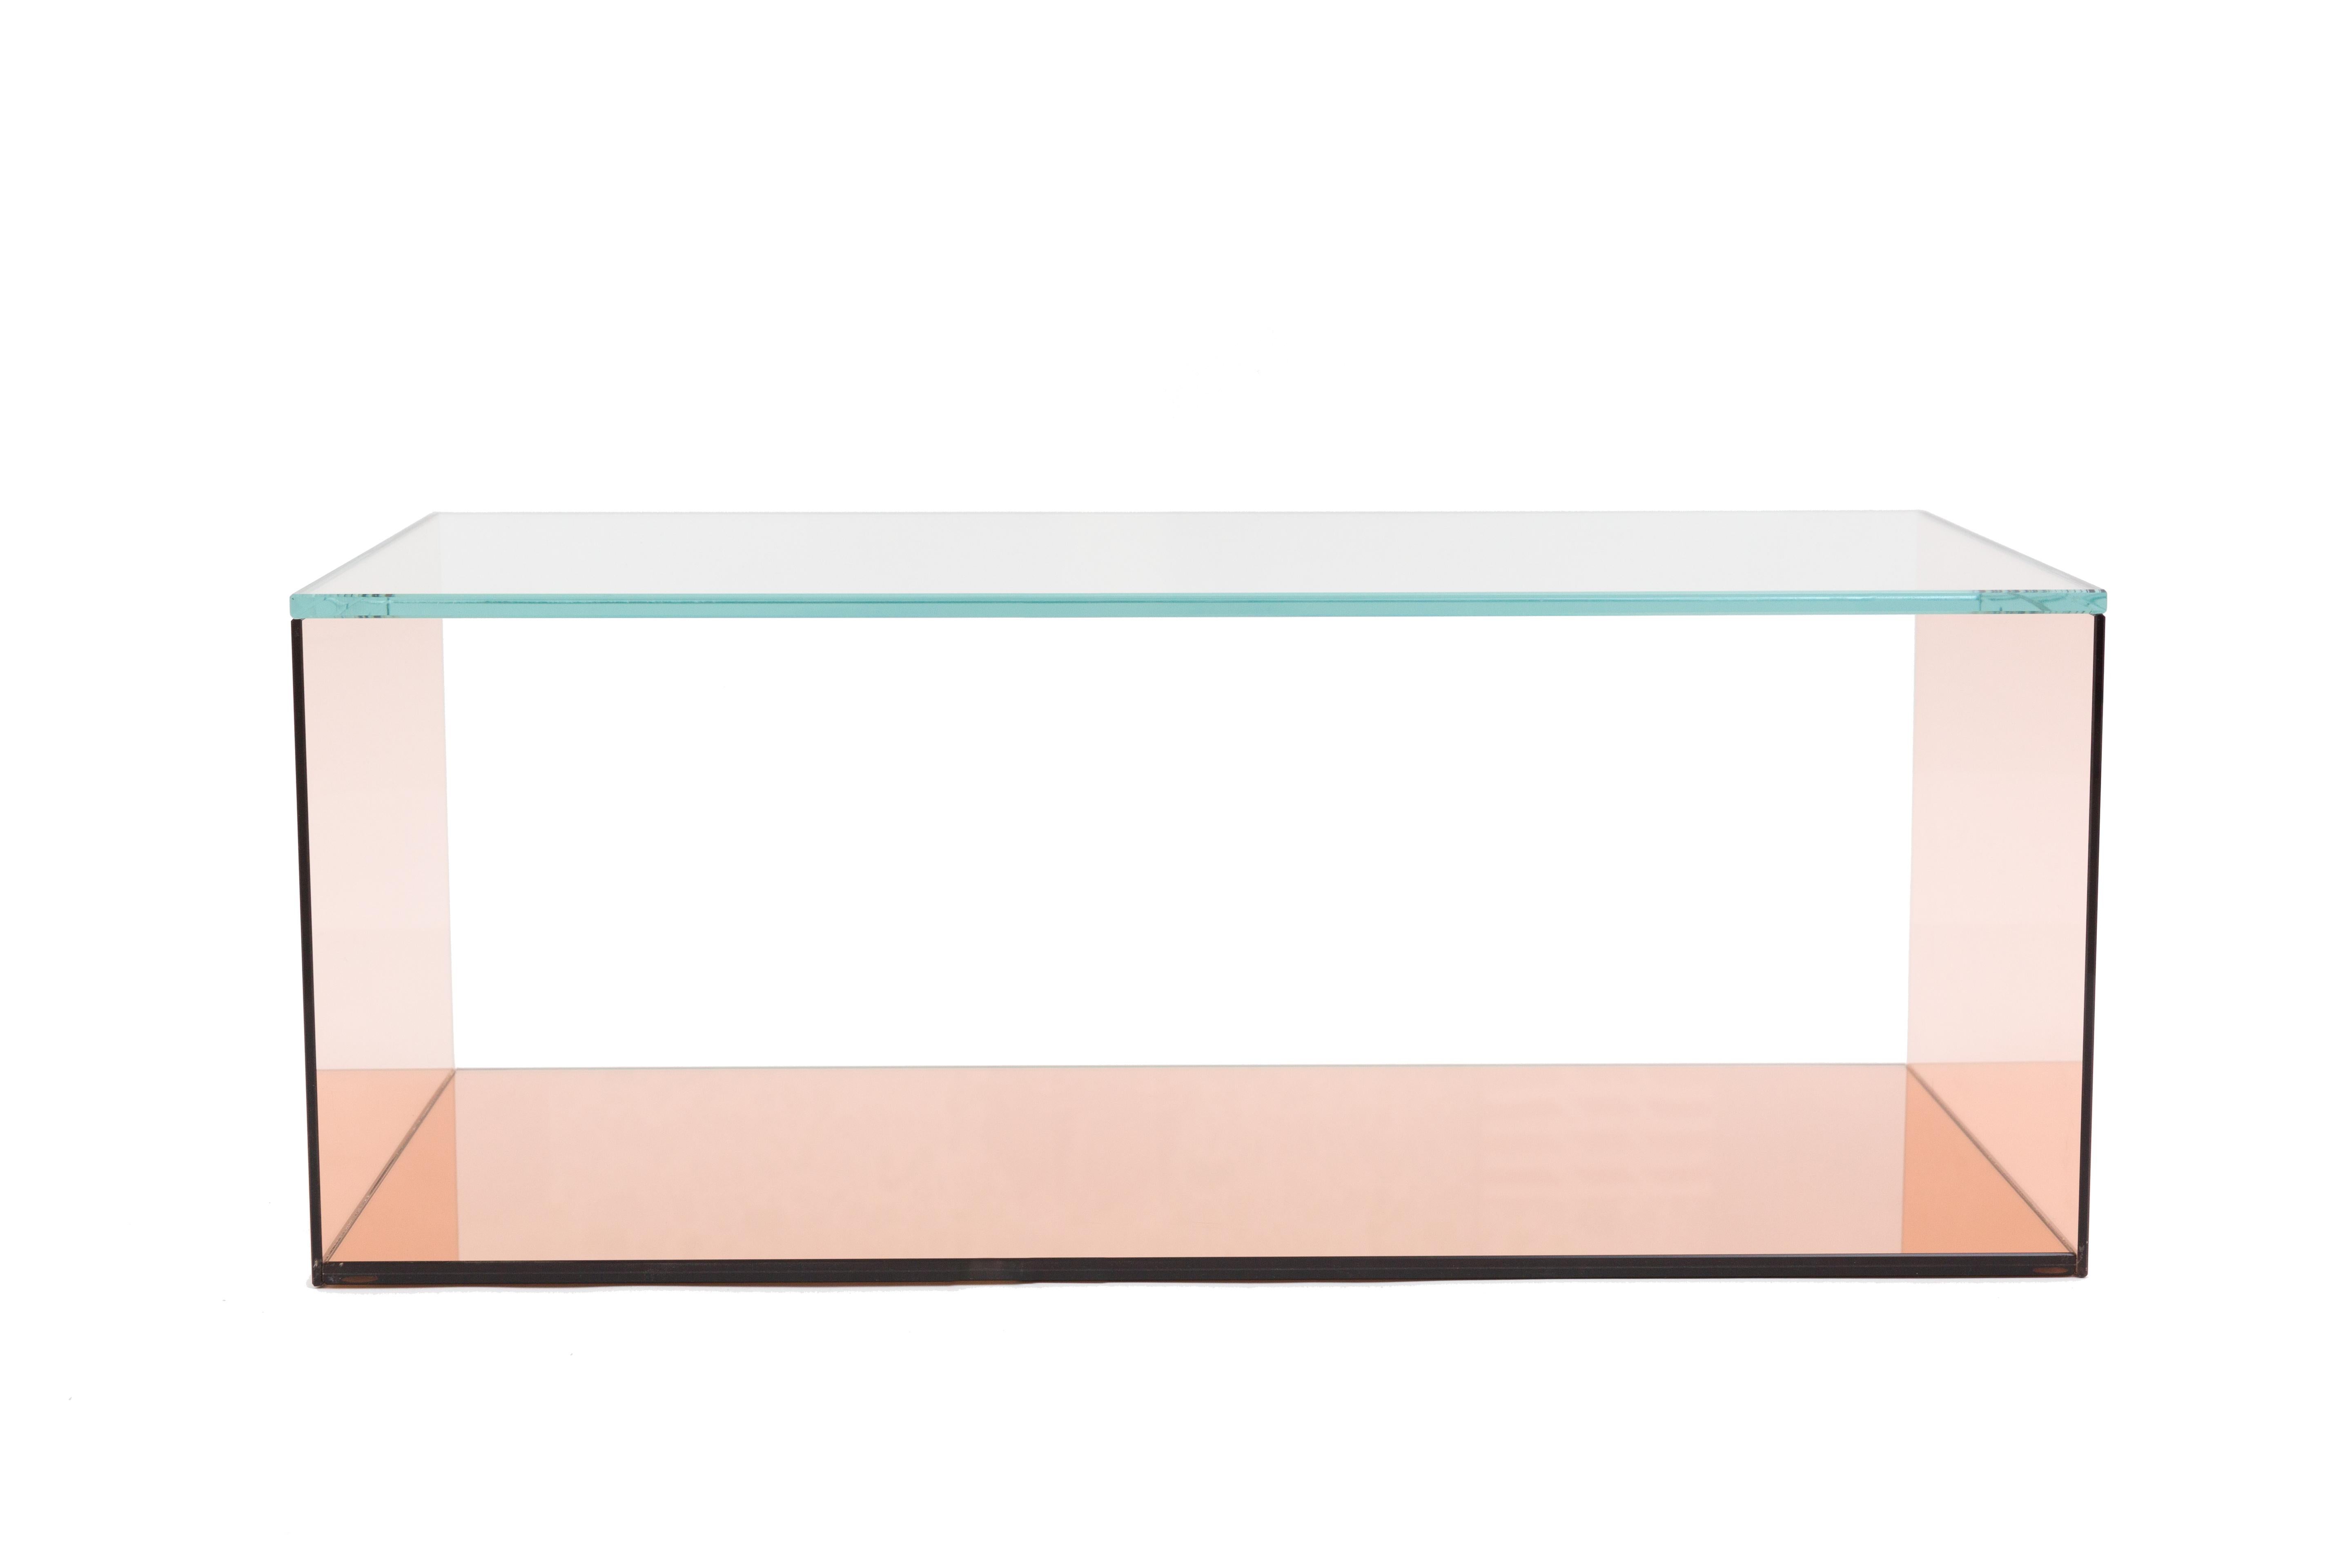 Coffee table of peach glass and mirror with an intriguing union of transparency and luminosity. Peach glass planes sides cap a clear glass top and back panel. The open front allows for decorative storage. The interior base is a peach mirror surface,